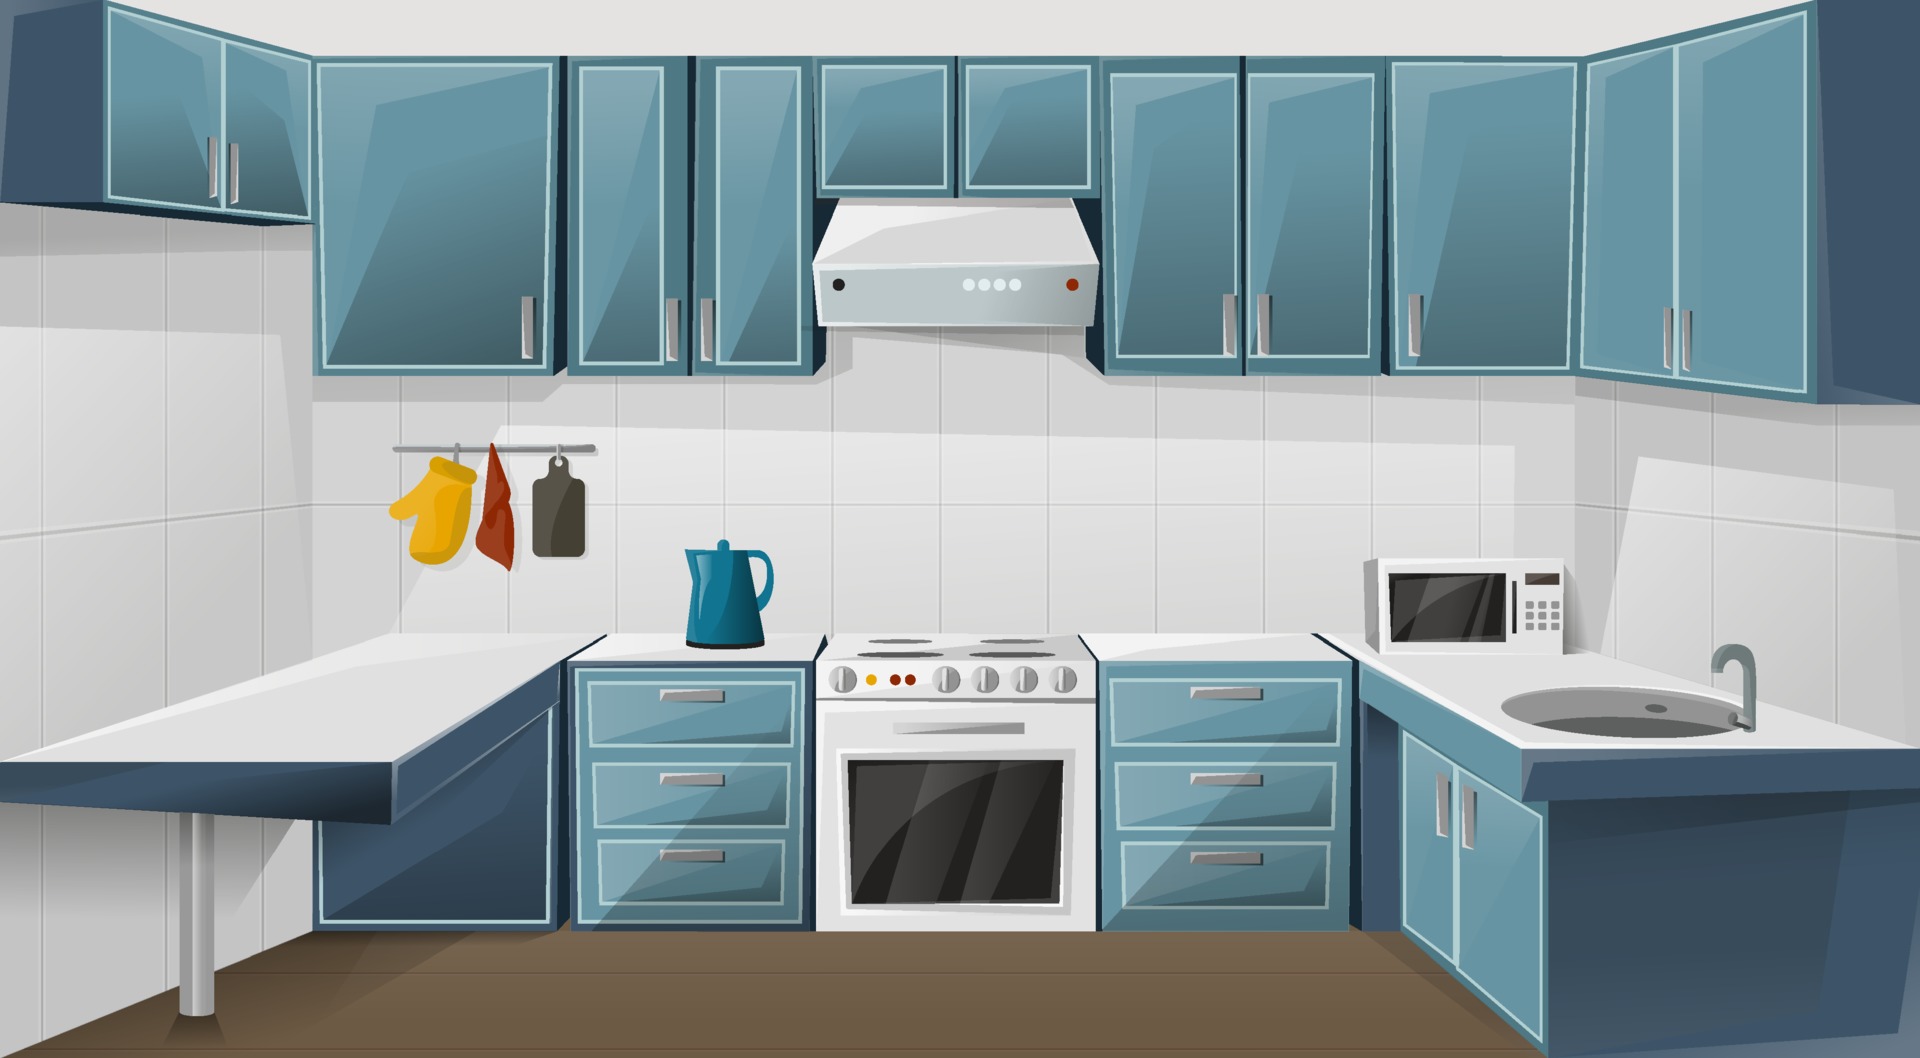 Kitchen Vector Art Icons And Graphics For Free Download